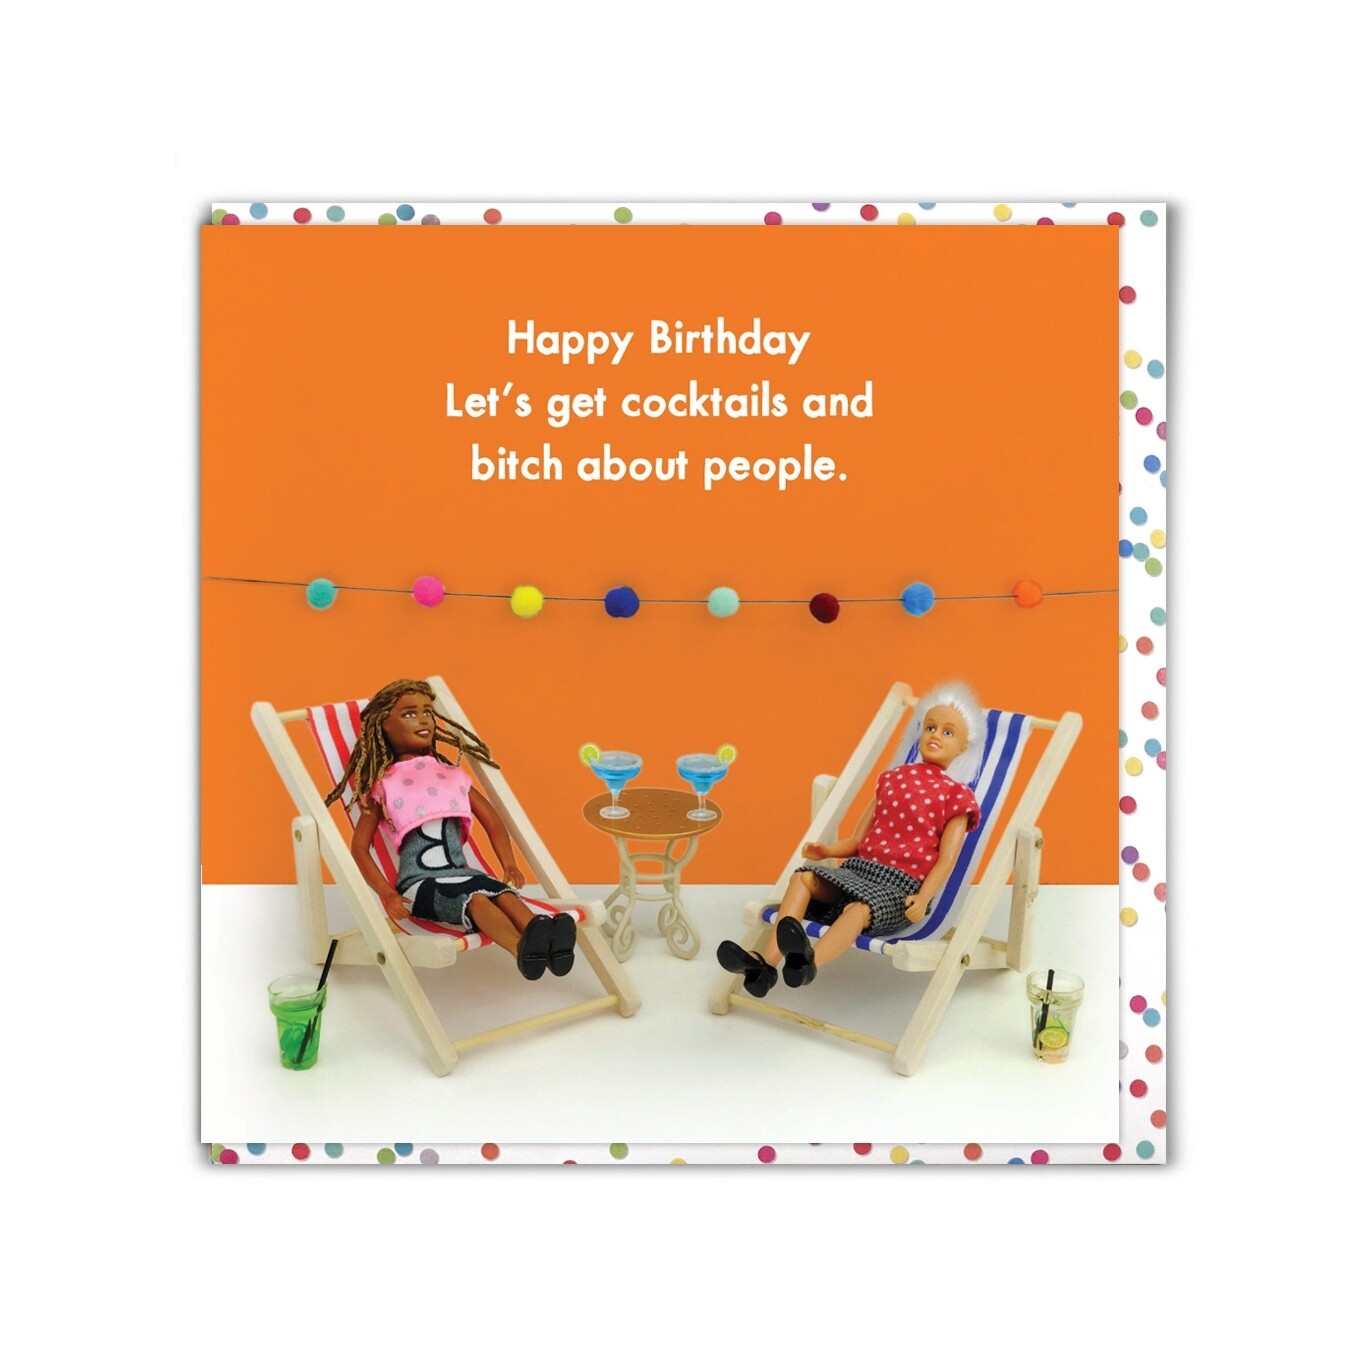 Bitch about People Card